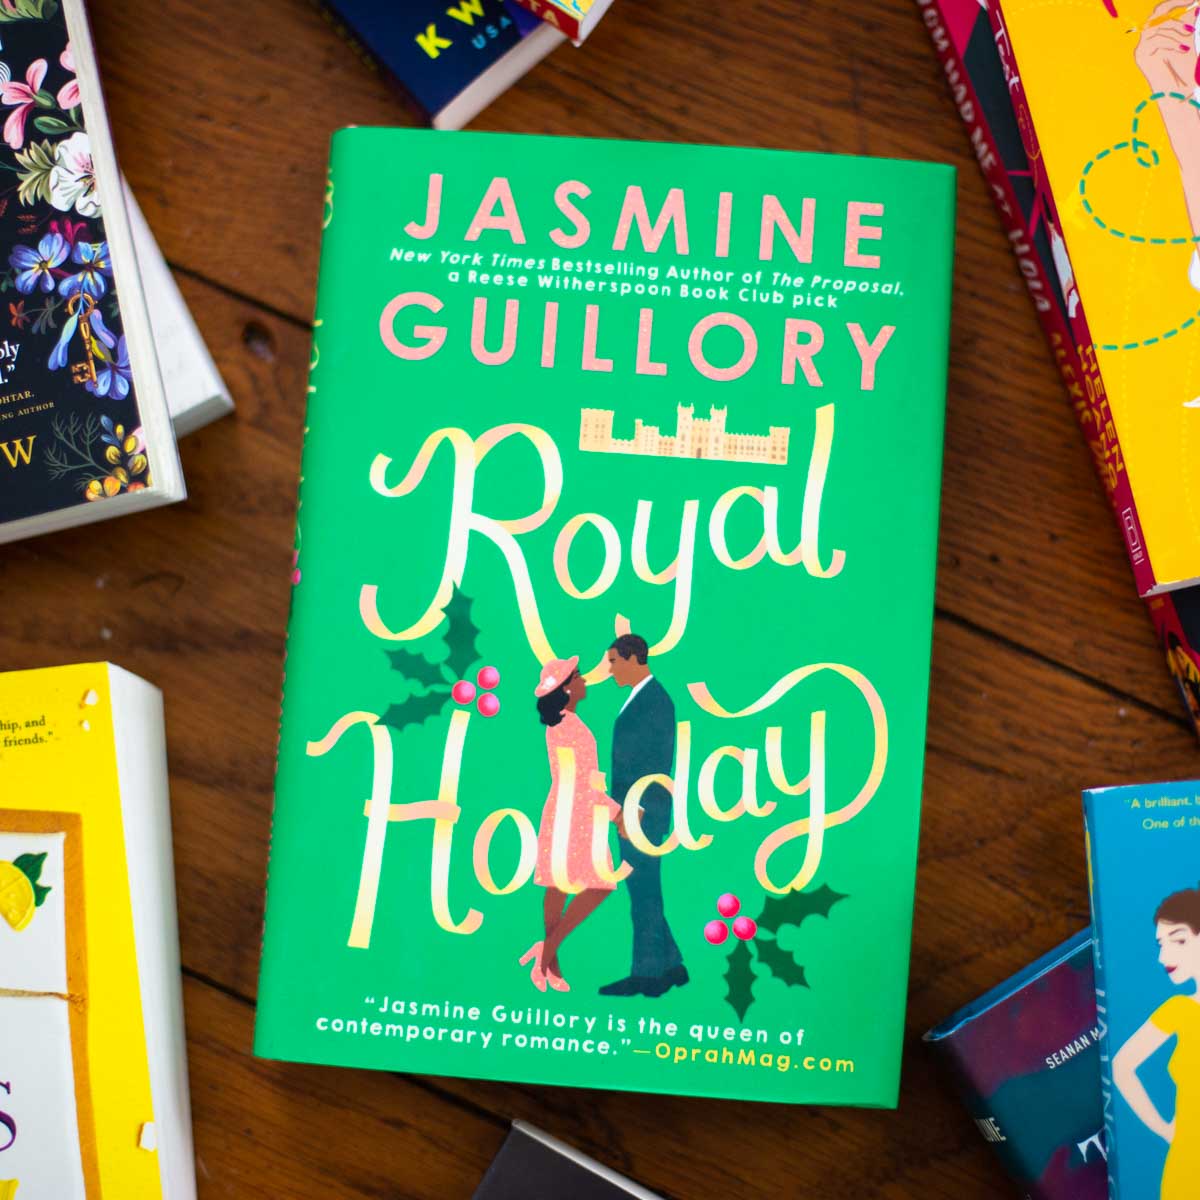 A copy of the book Royal Holiday is on the table.